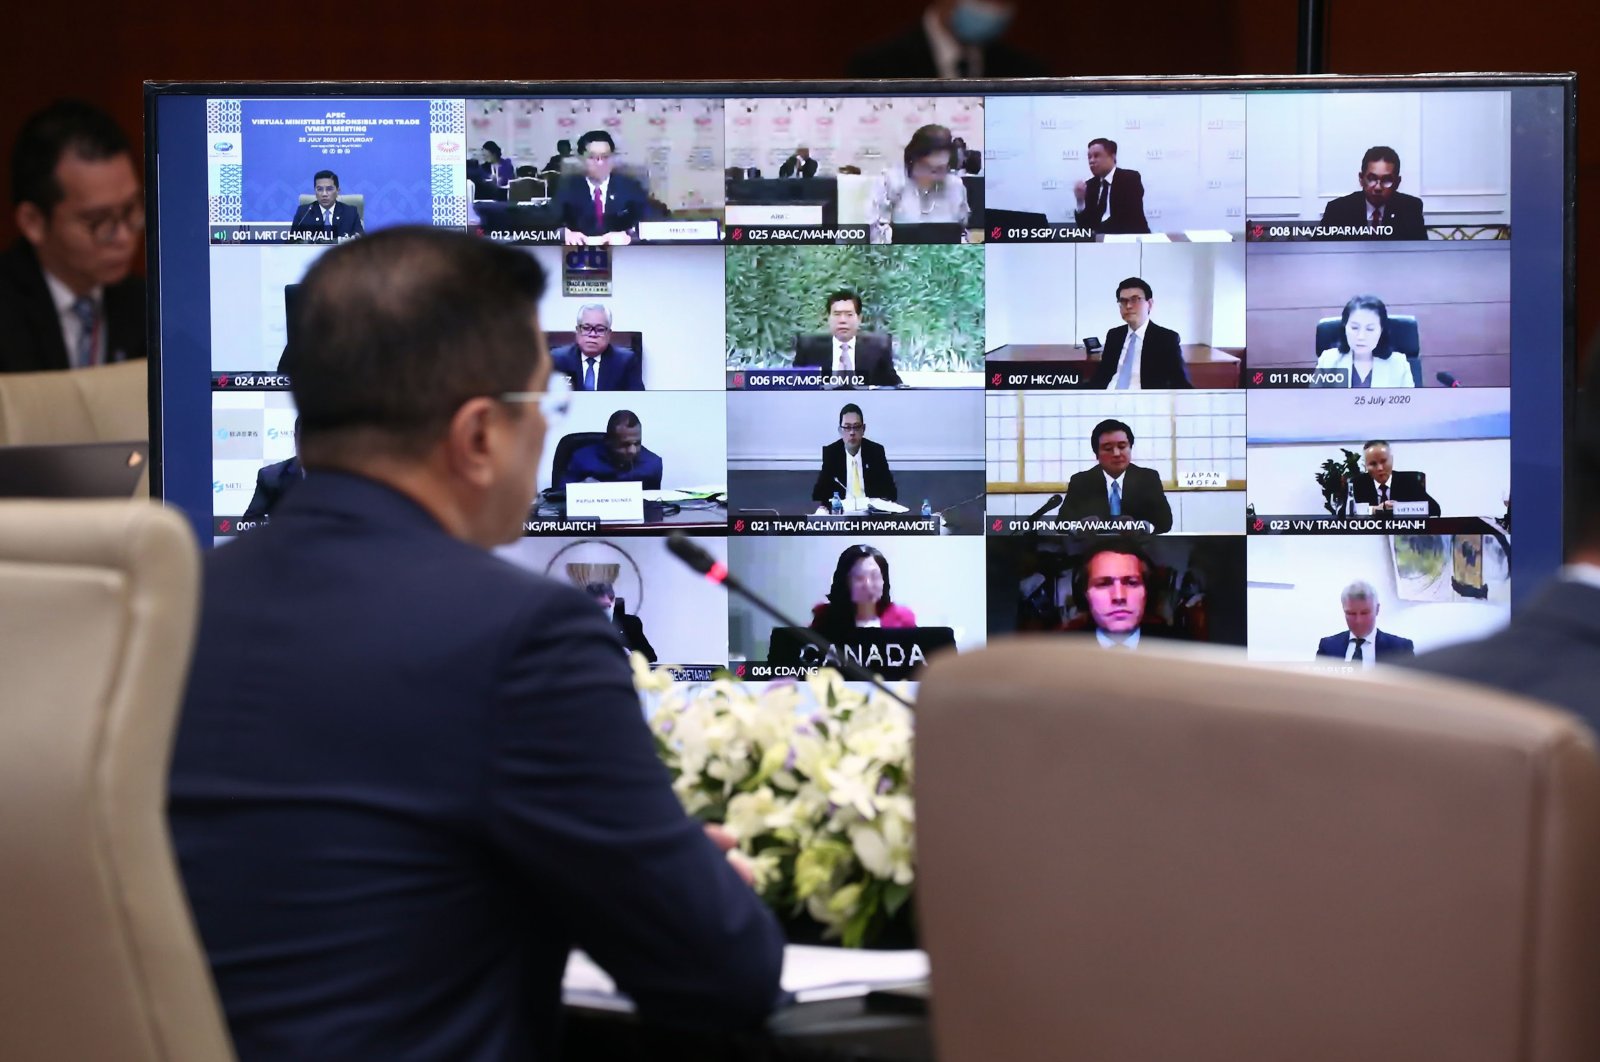 Mohamed Azmin Ali (L), Malaysia's Minister of International Trade and Industry, speaking before a monitor showing participants in the 2020 APEC Virtual Ministers Responsible for Trade Meeting on the COVID-19 coronavirus crisis in Kuala Lumpur, Malaysia on July 25, 2020. (AFP Photo)